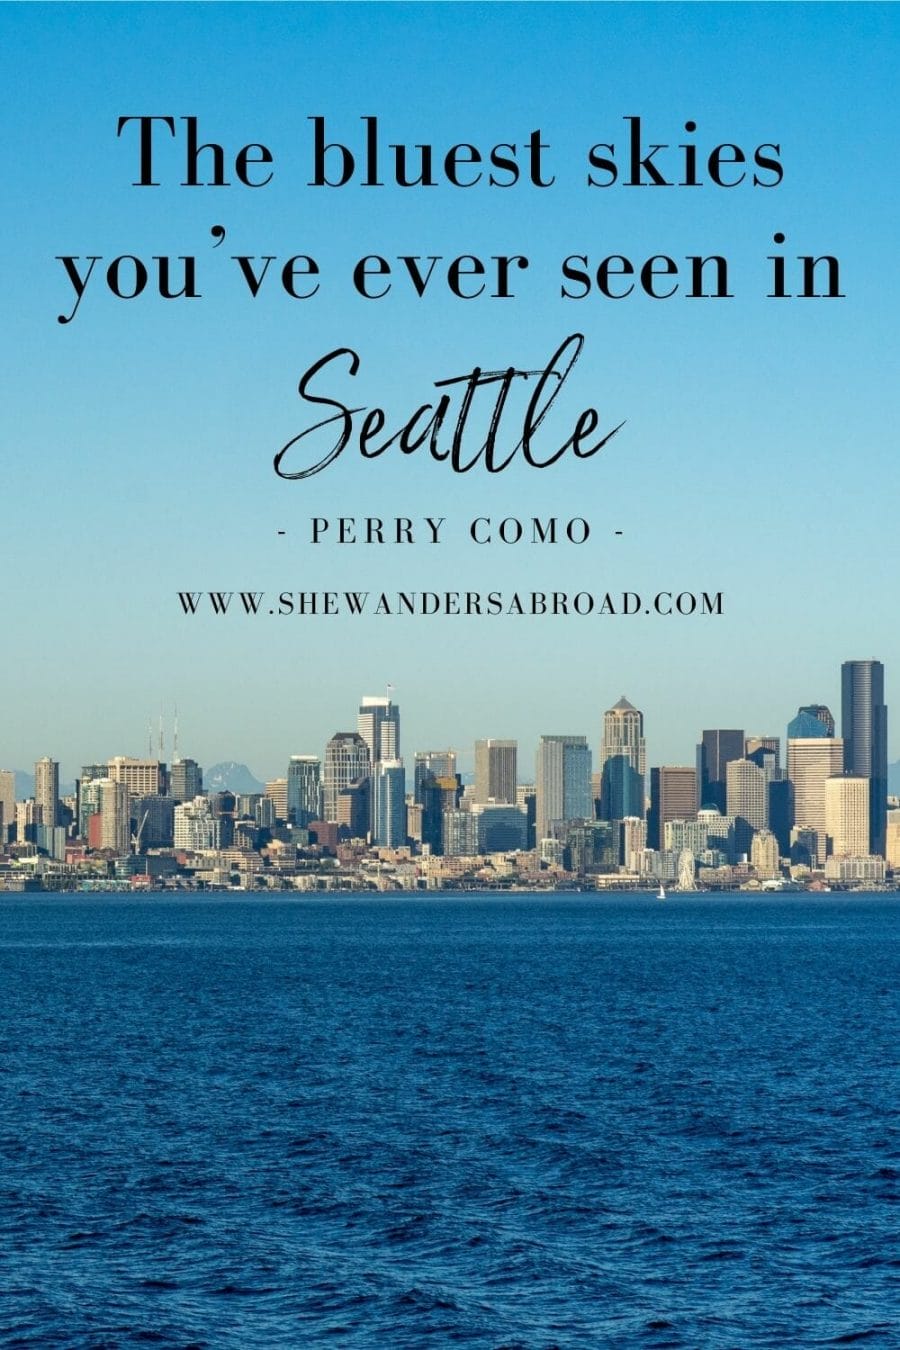 Short Seattle Quotes for Instagram